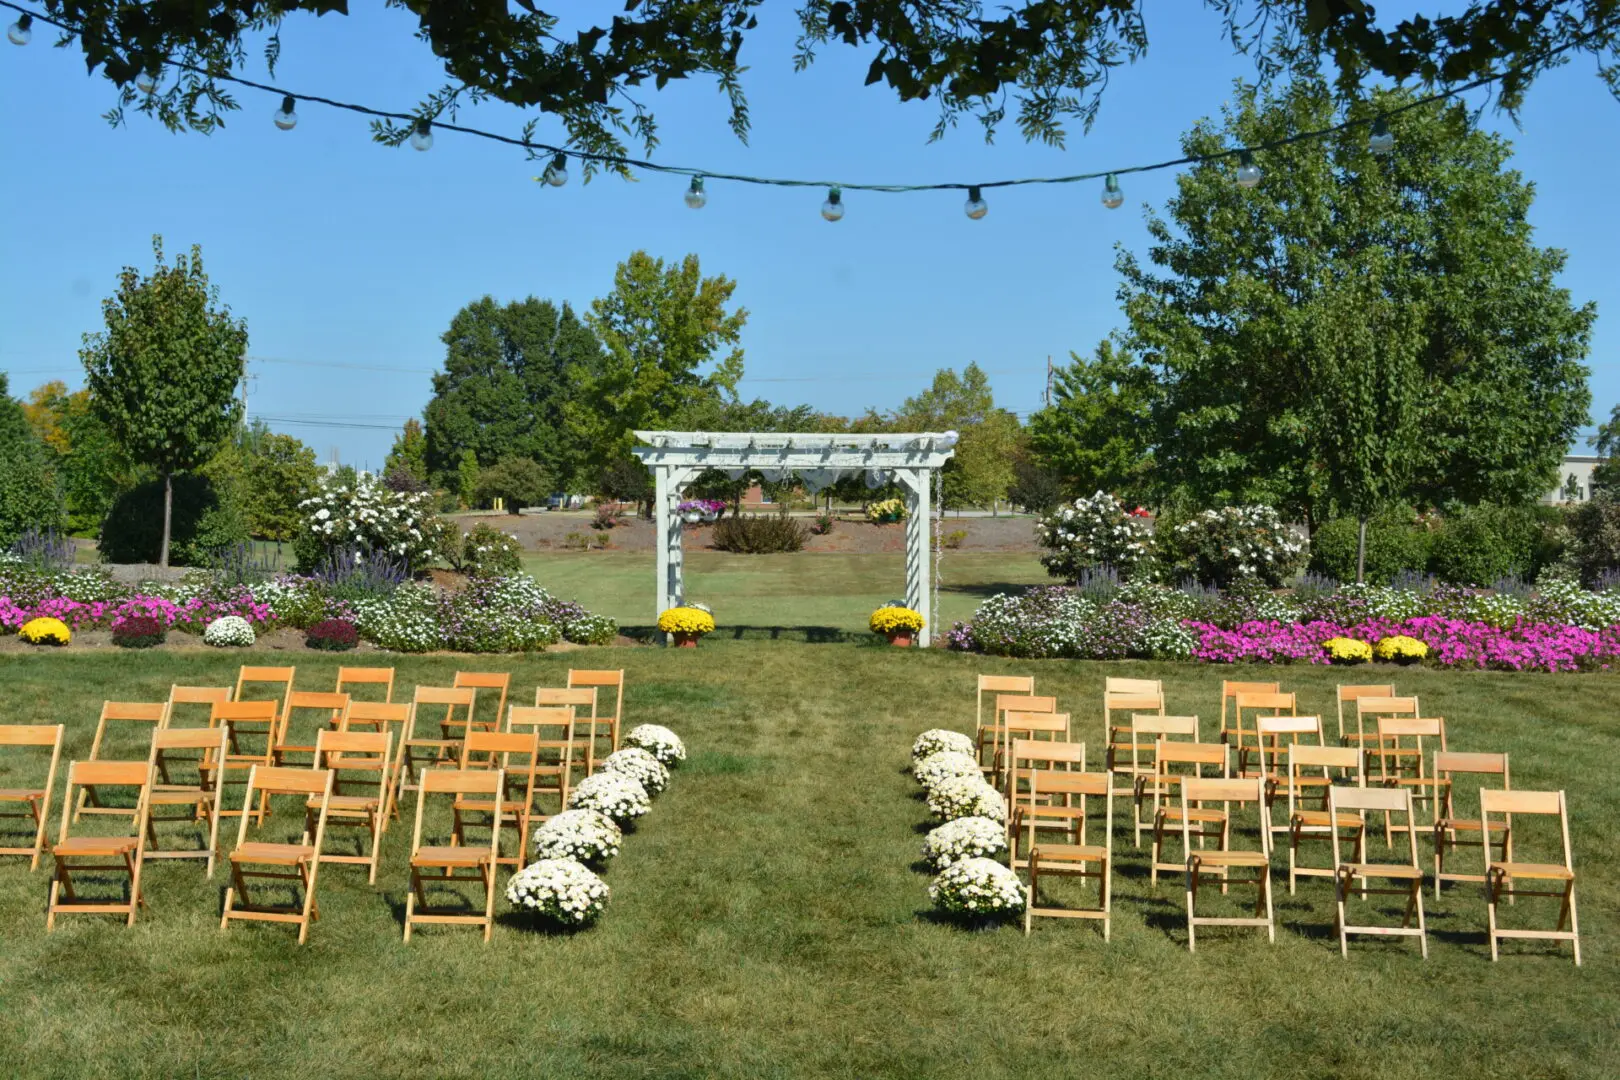 Outdoor wedding setup with rows of wooden chairs facing a white pergola, surrounded by colorful shrubs and strung lights above on a sunny day.